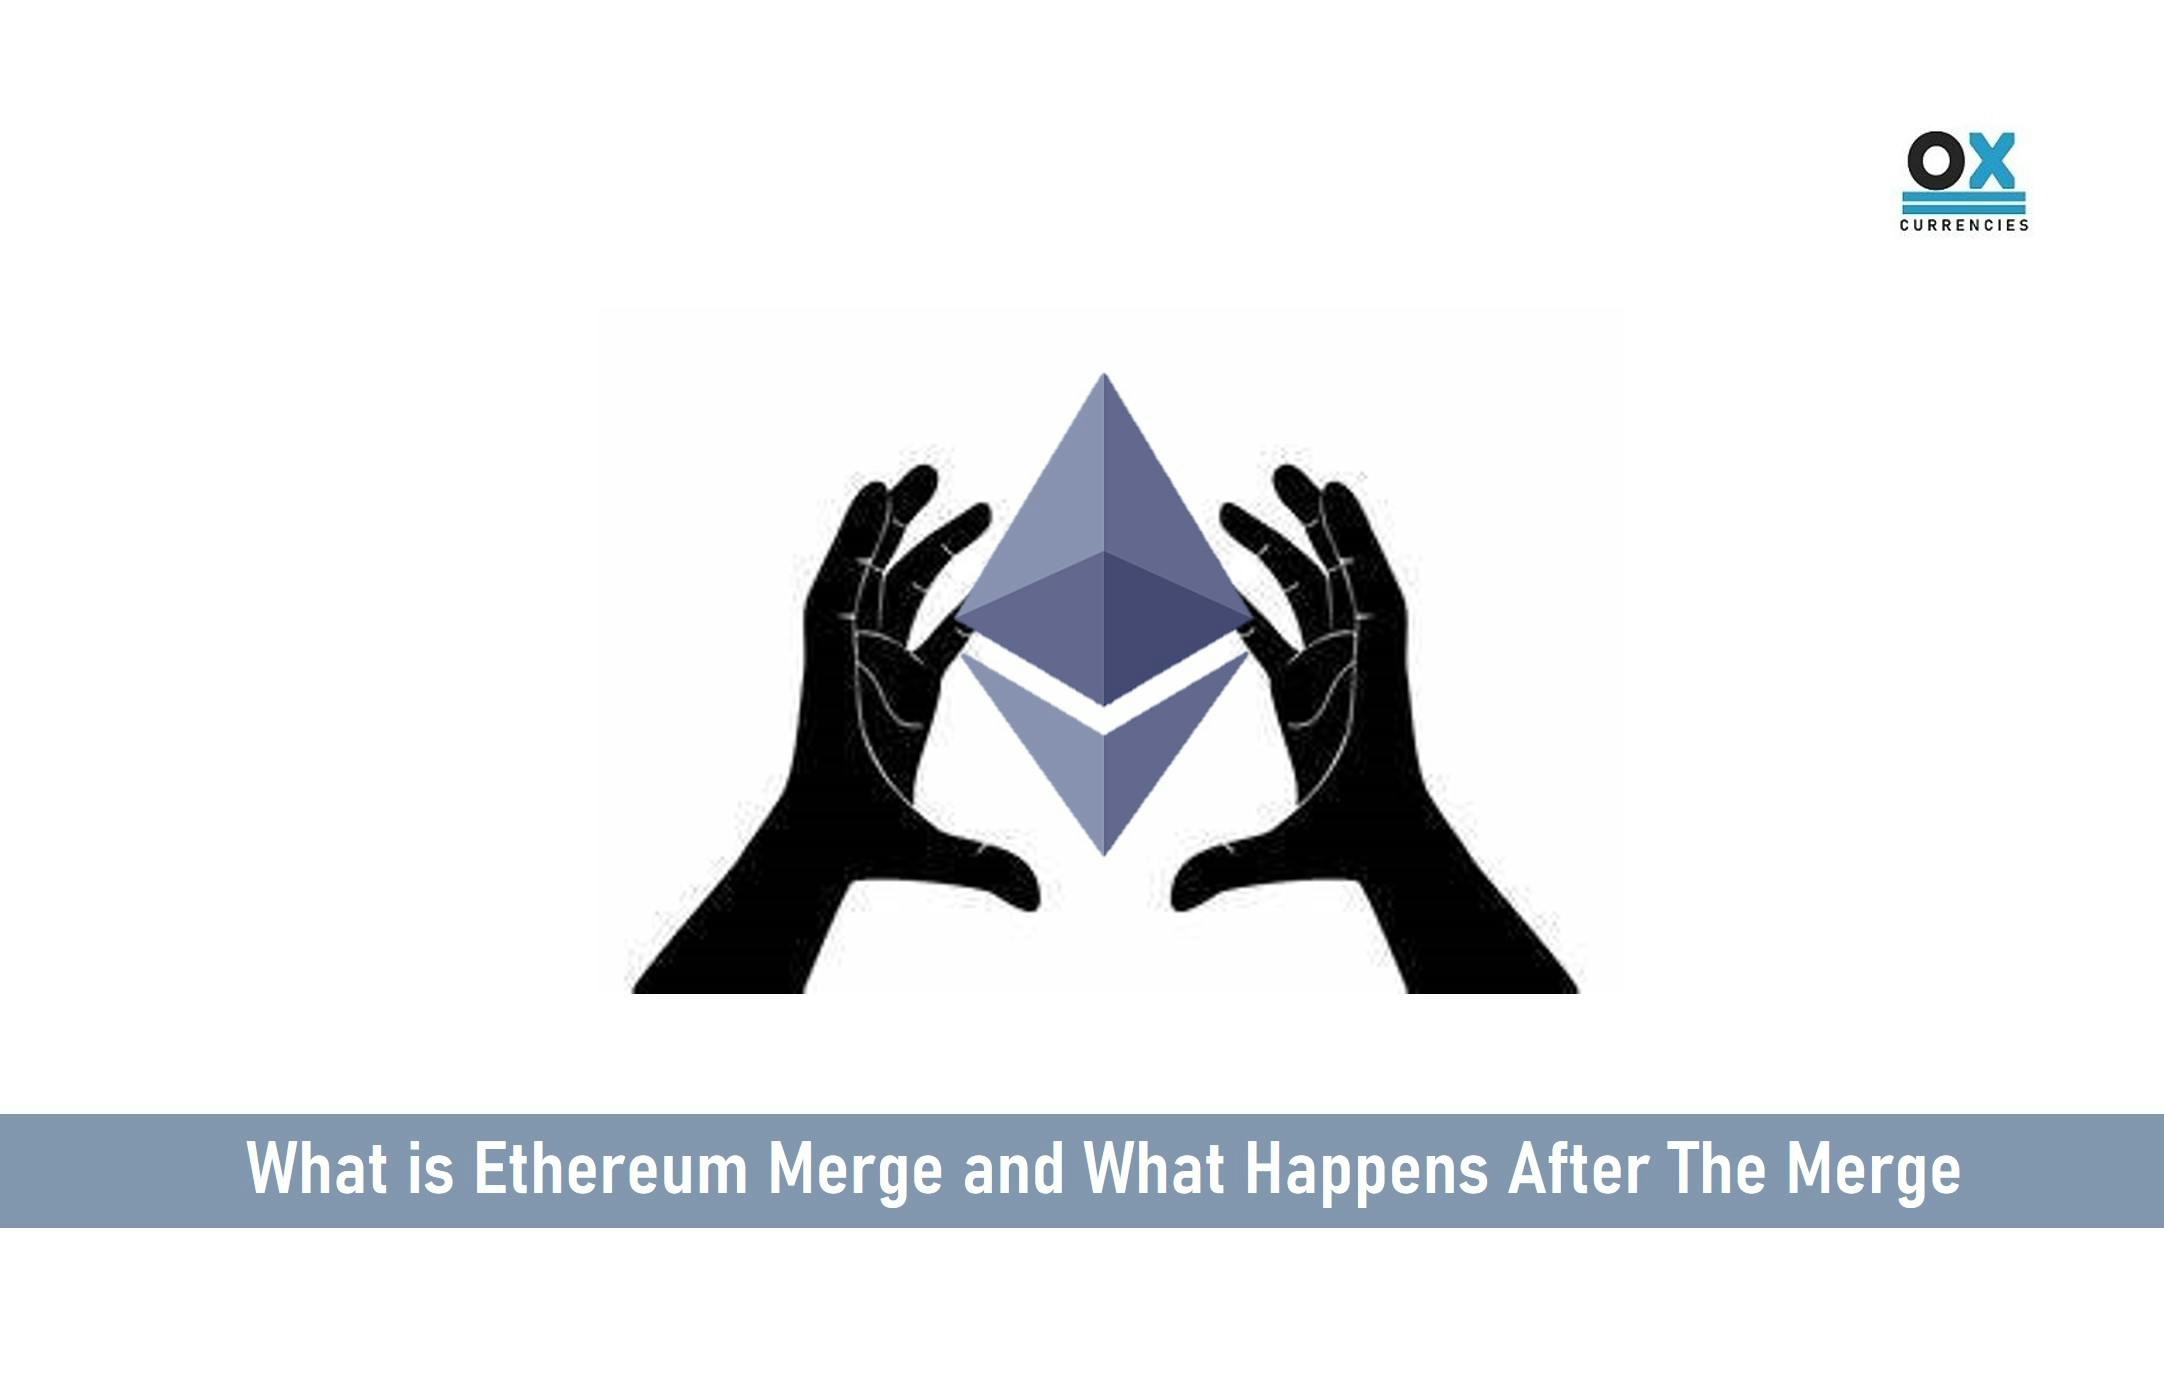 What is Ethereum Merge and What Happens After The Merge?